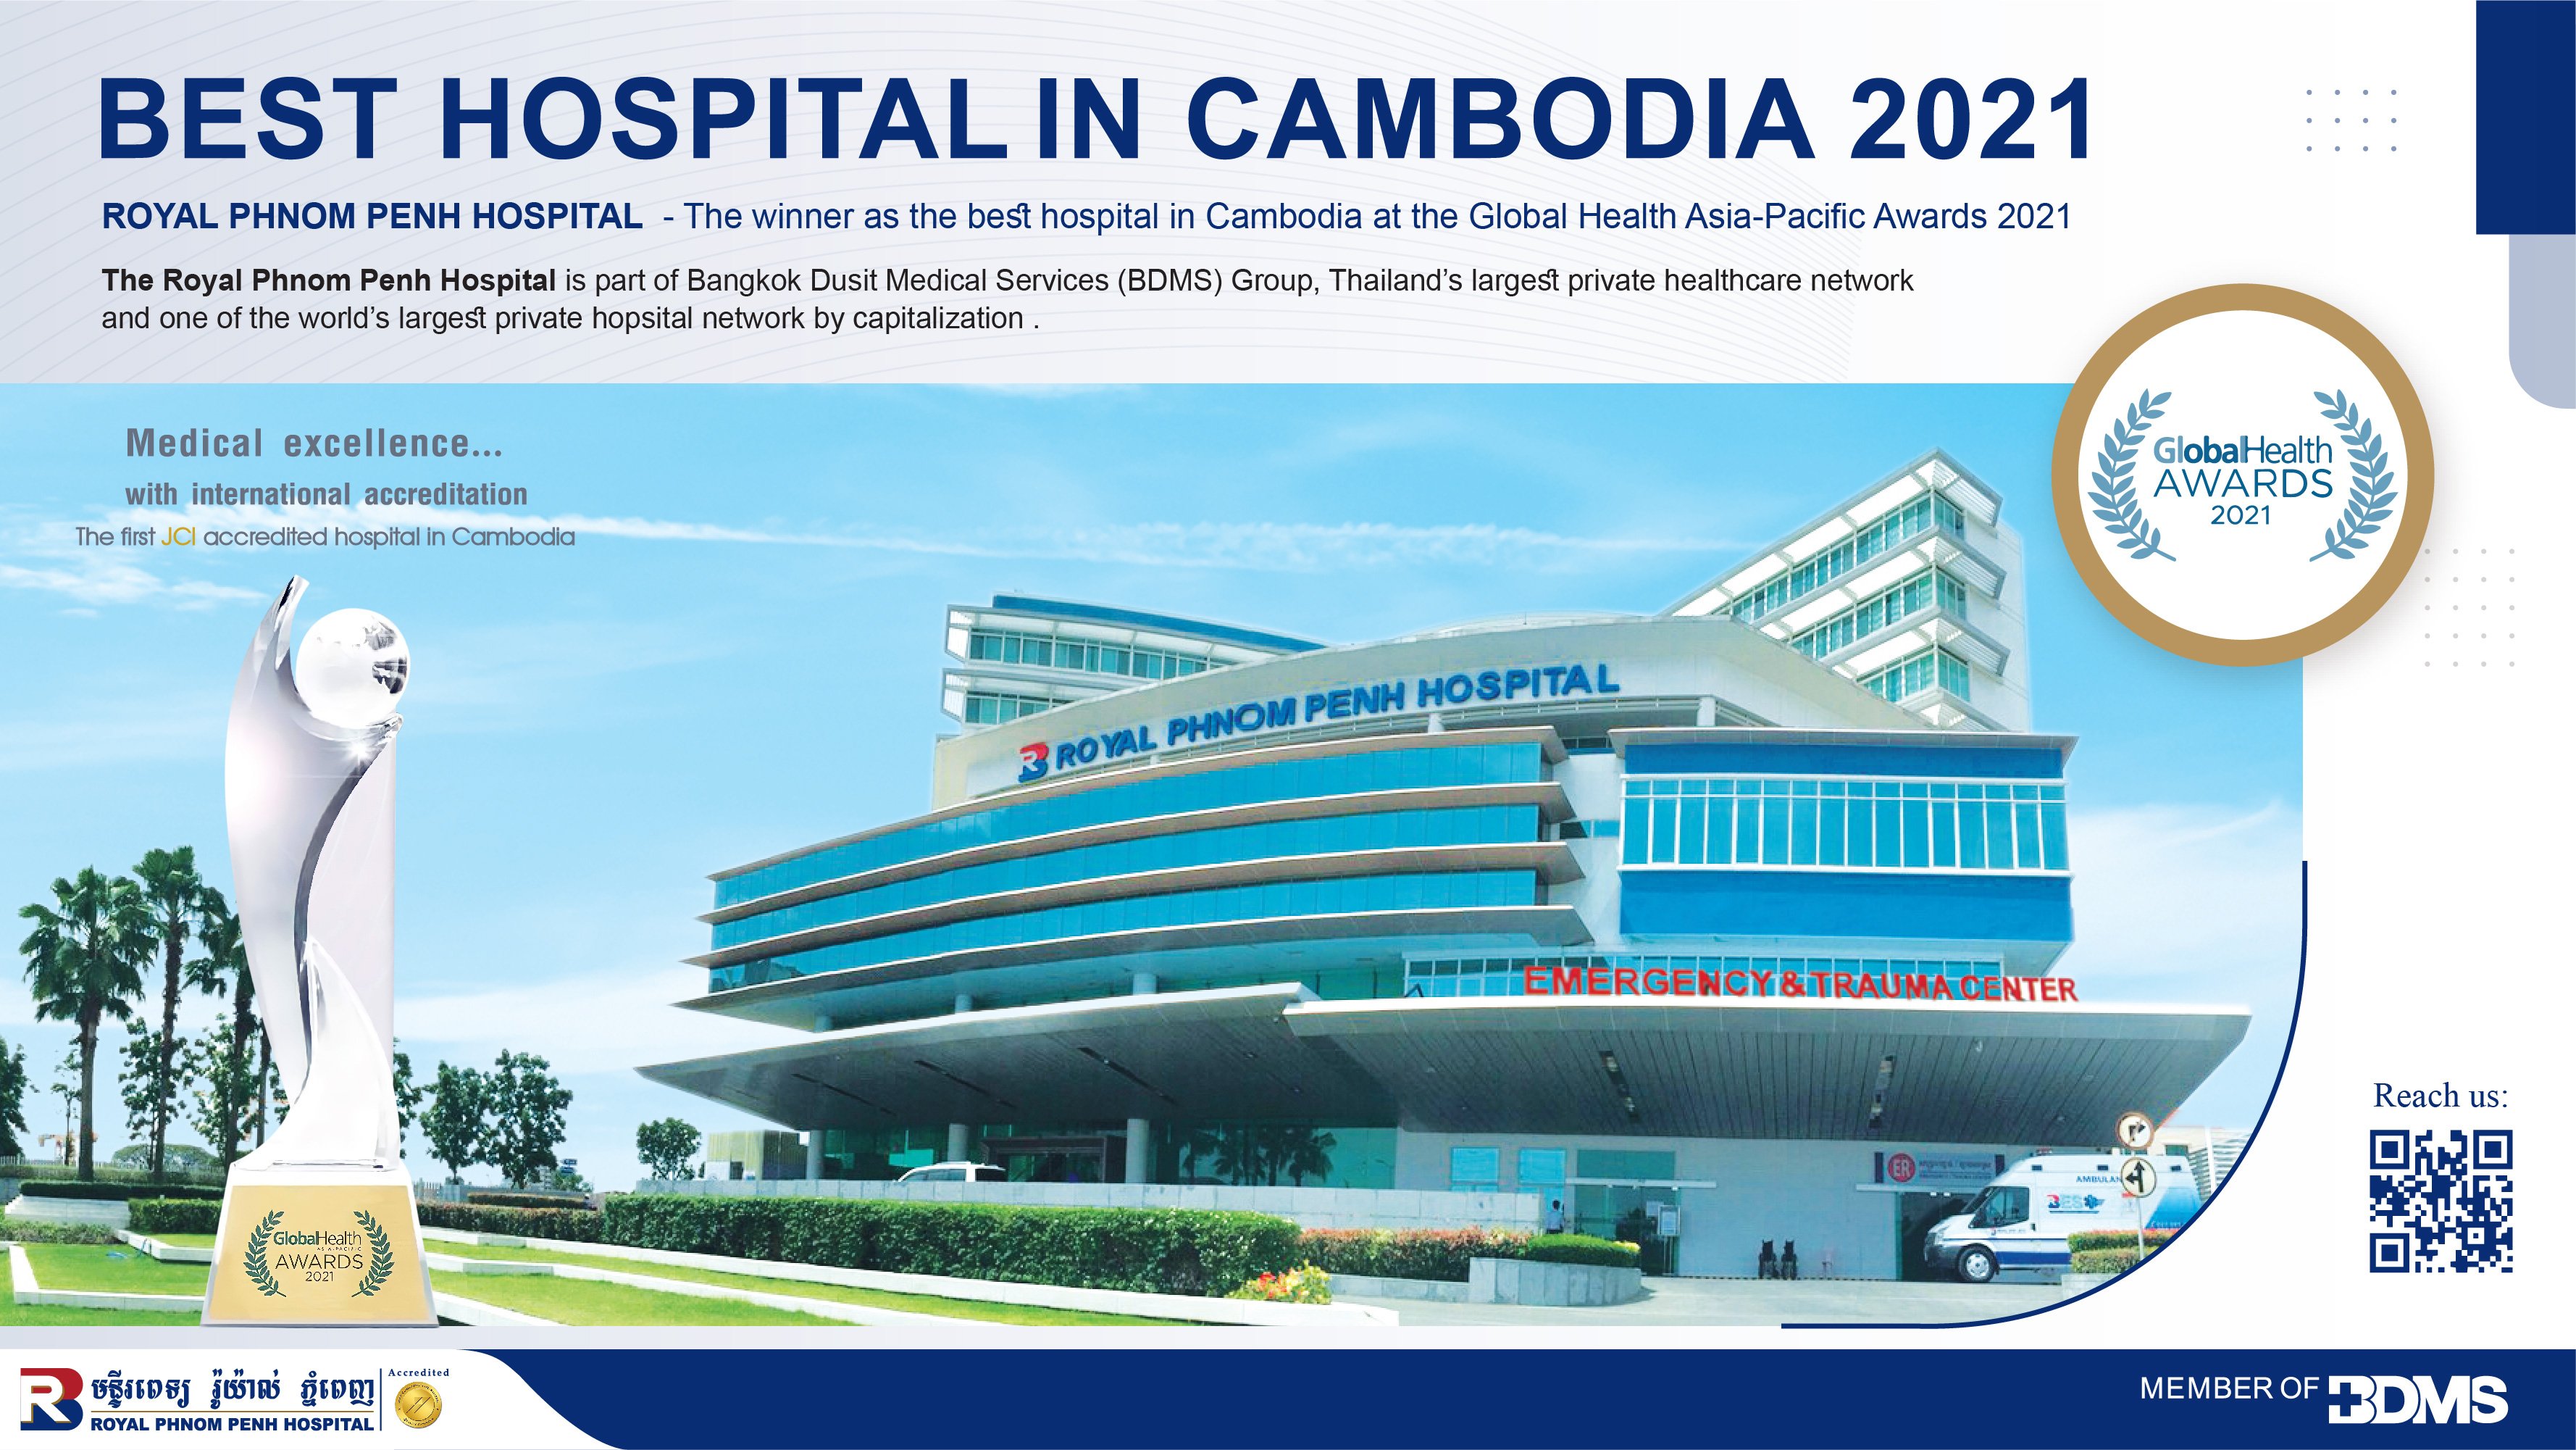 WINNER AS THE BEST HOSPITAL IN CAMBODIA AT THE GLOBAL HEALTH ASIA-PACIFIC AWARDS 2021